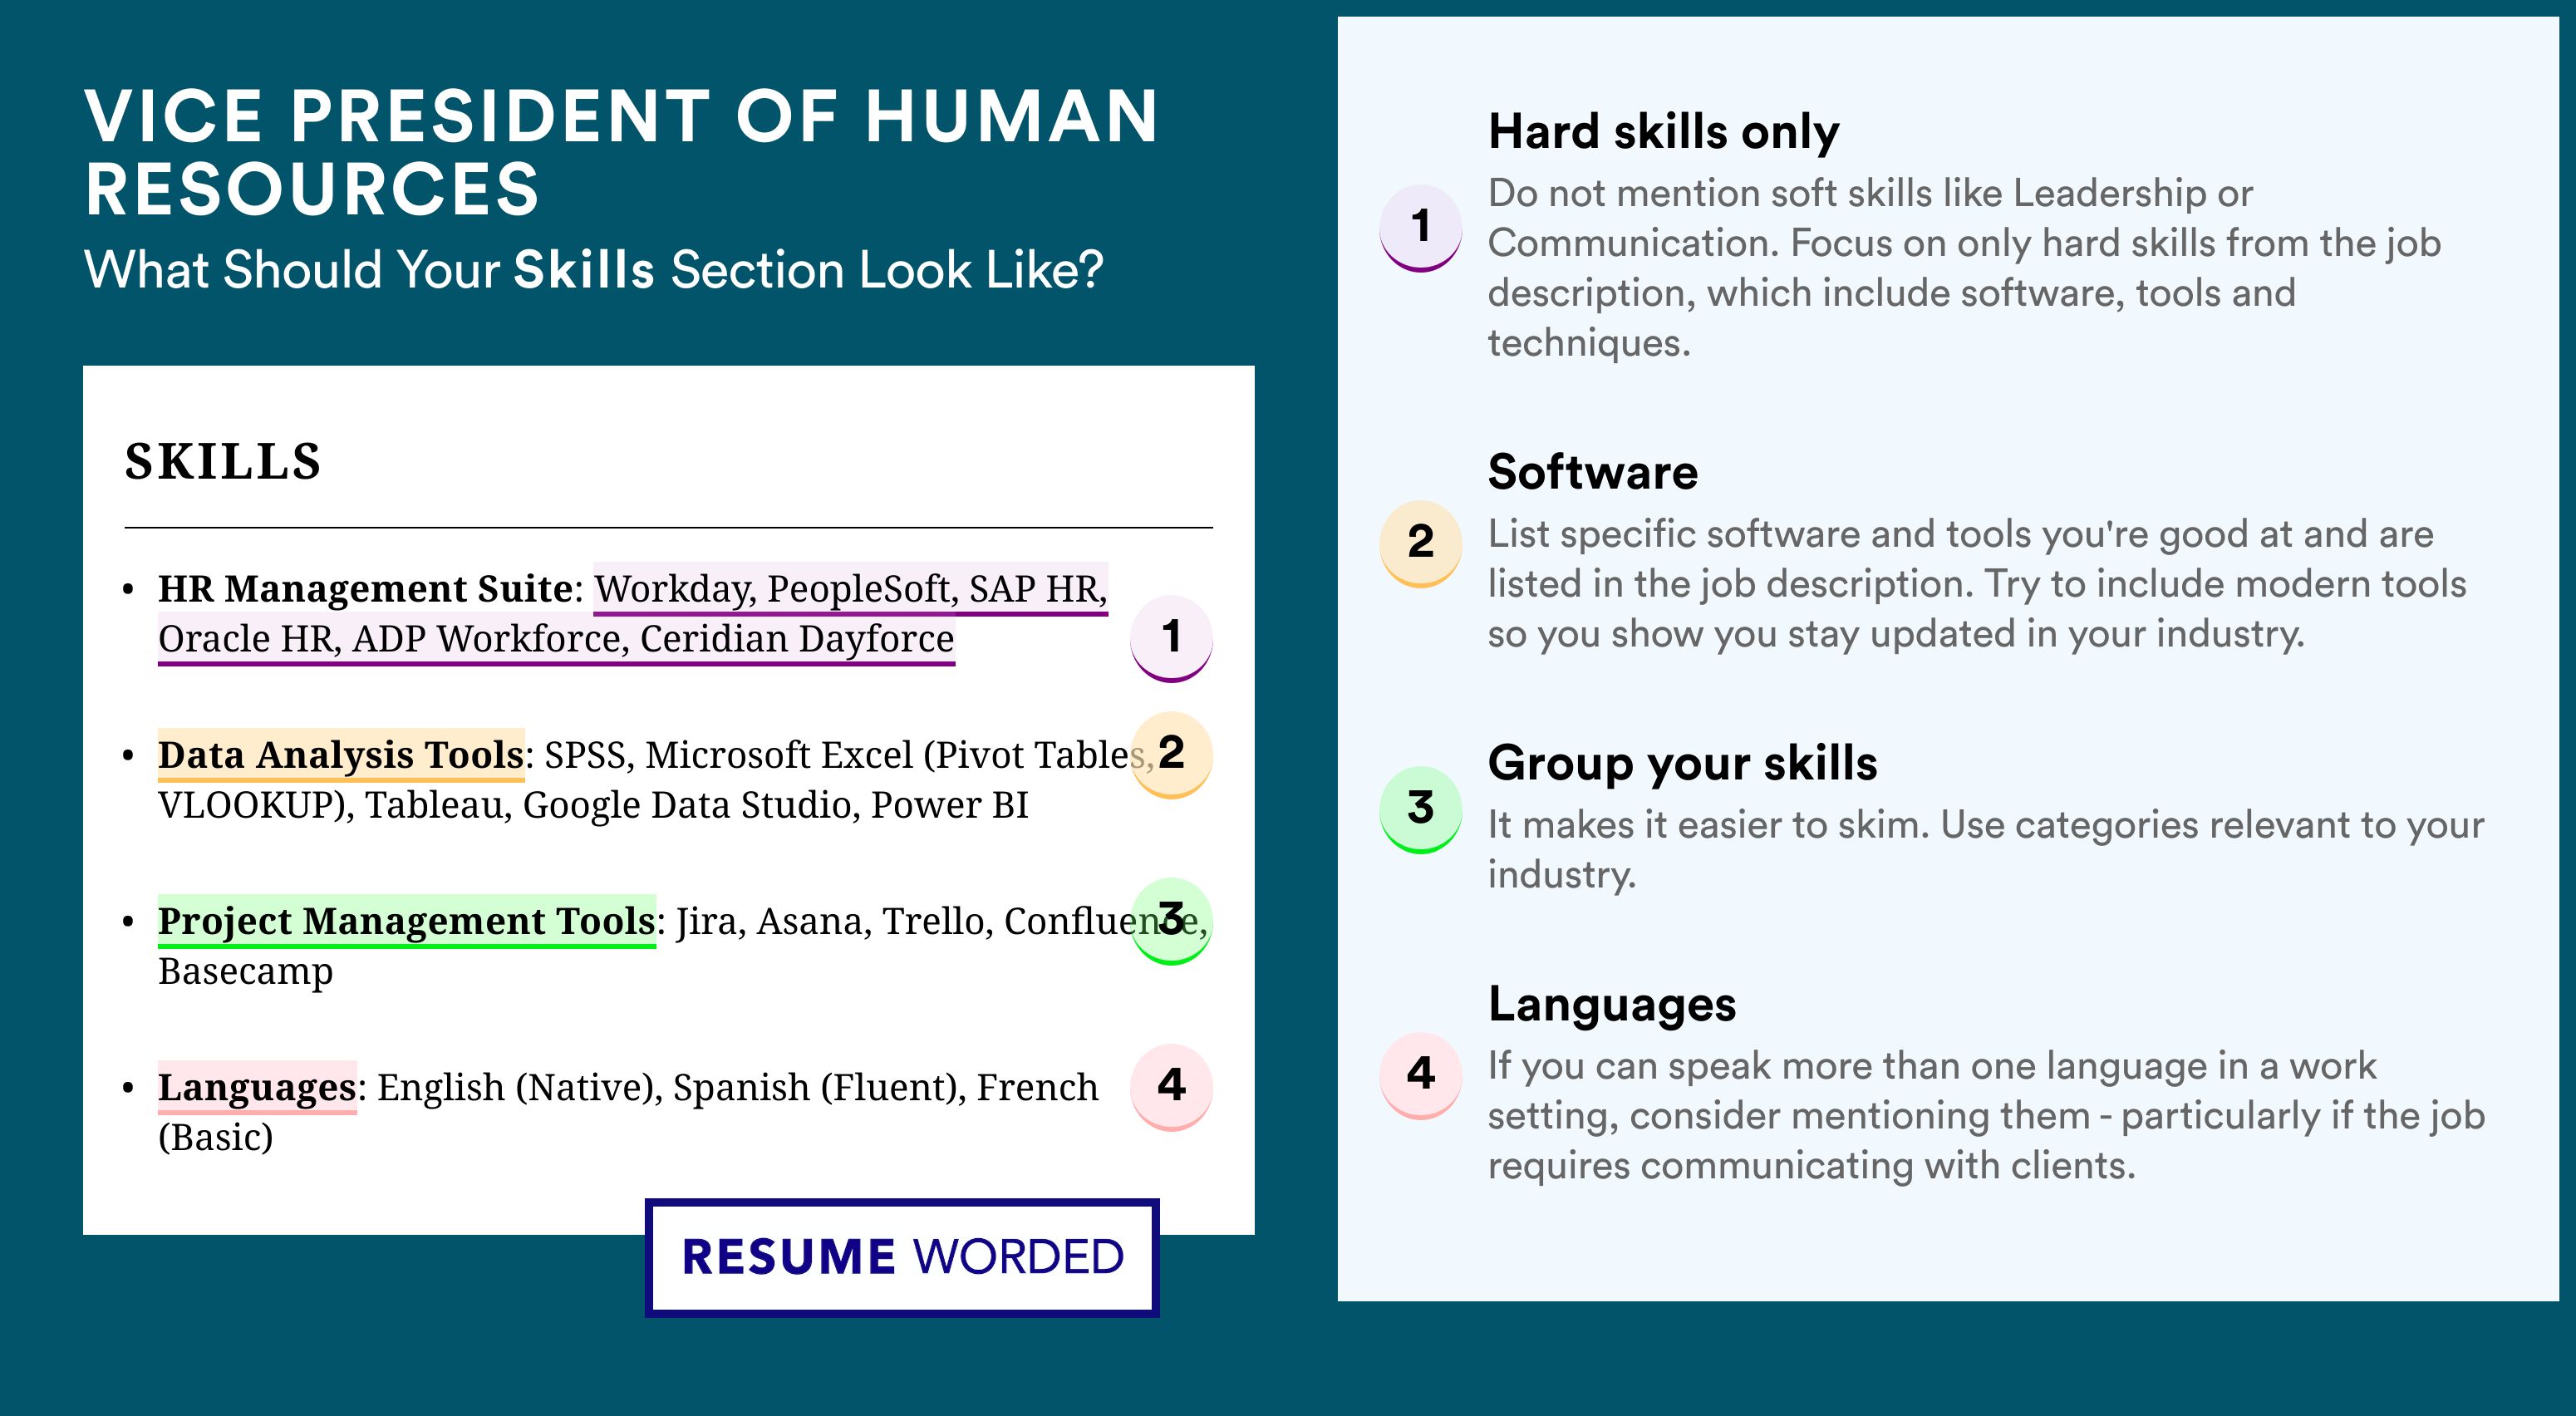 How To Write Your Skills Section - Vice President of Human Resources Roles